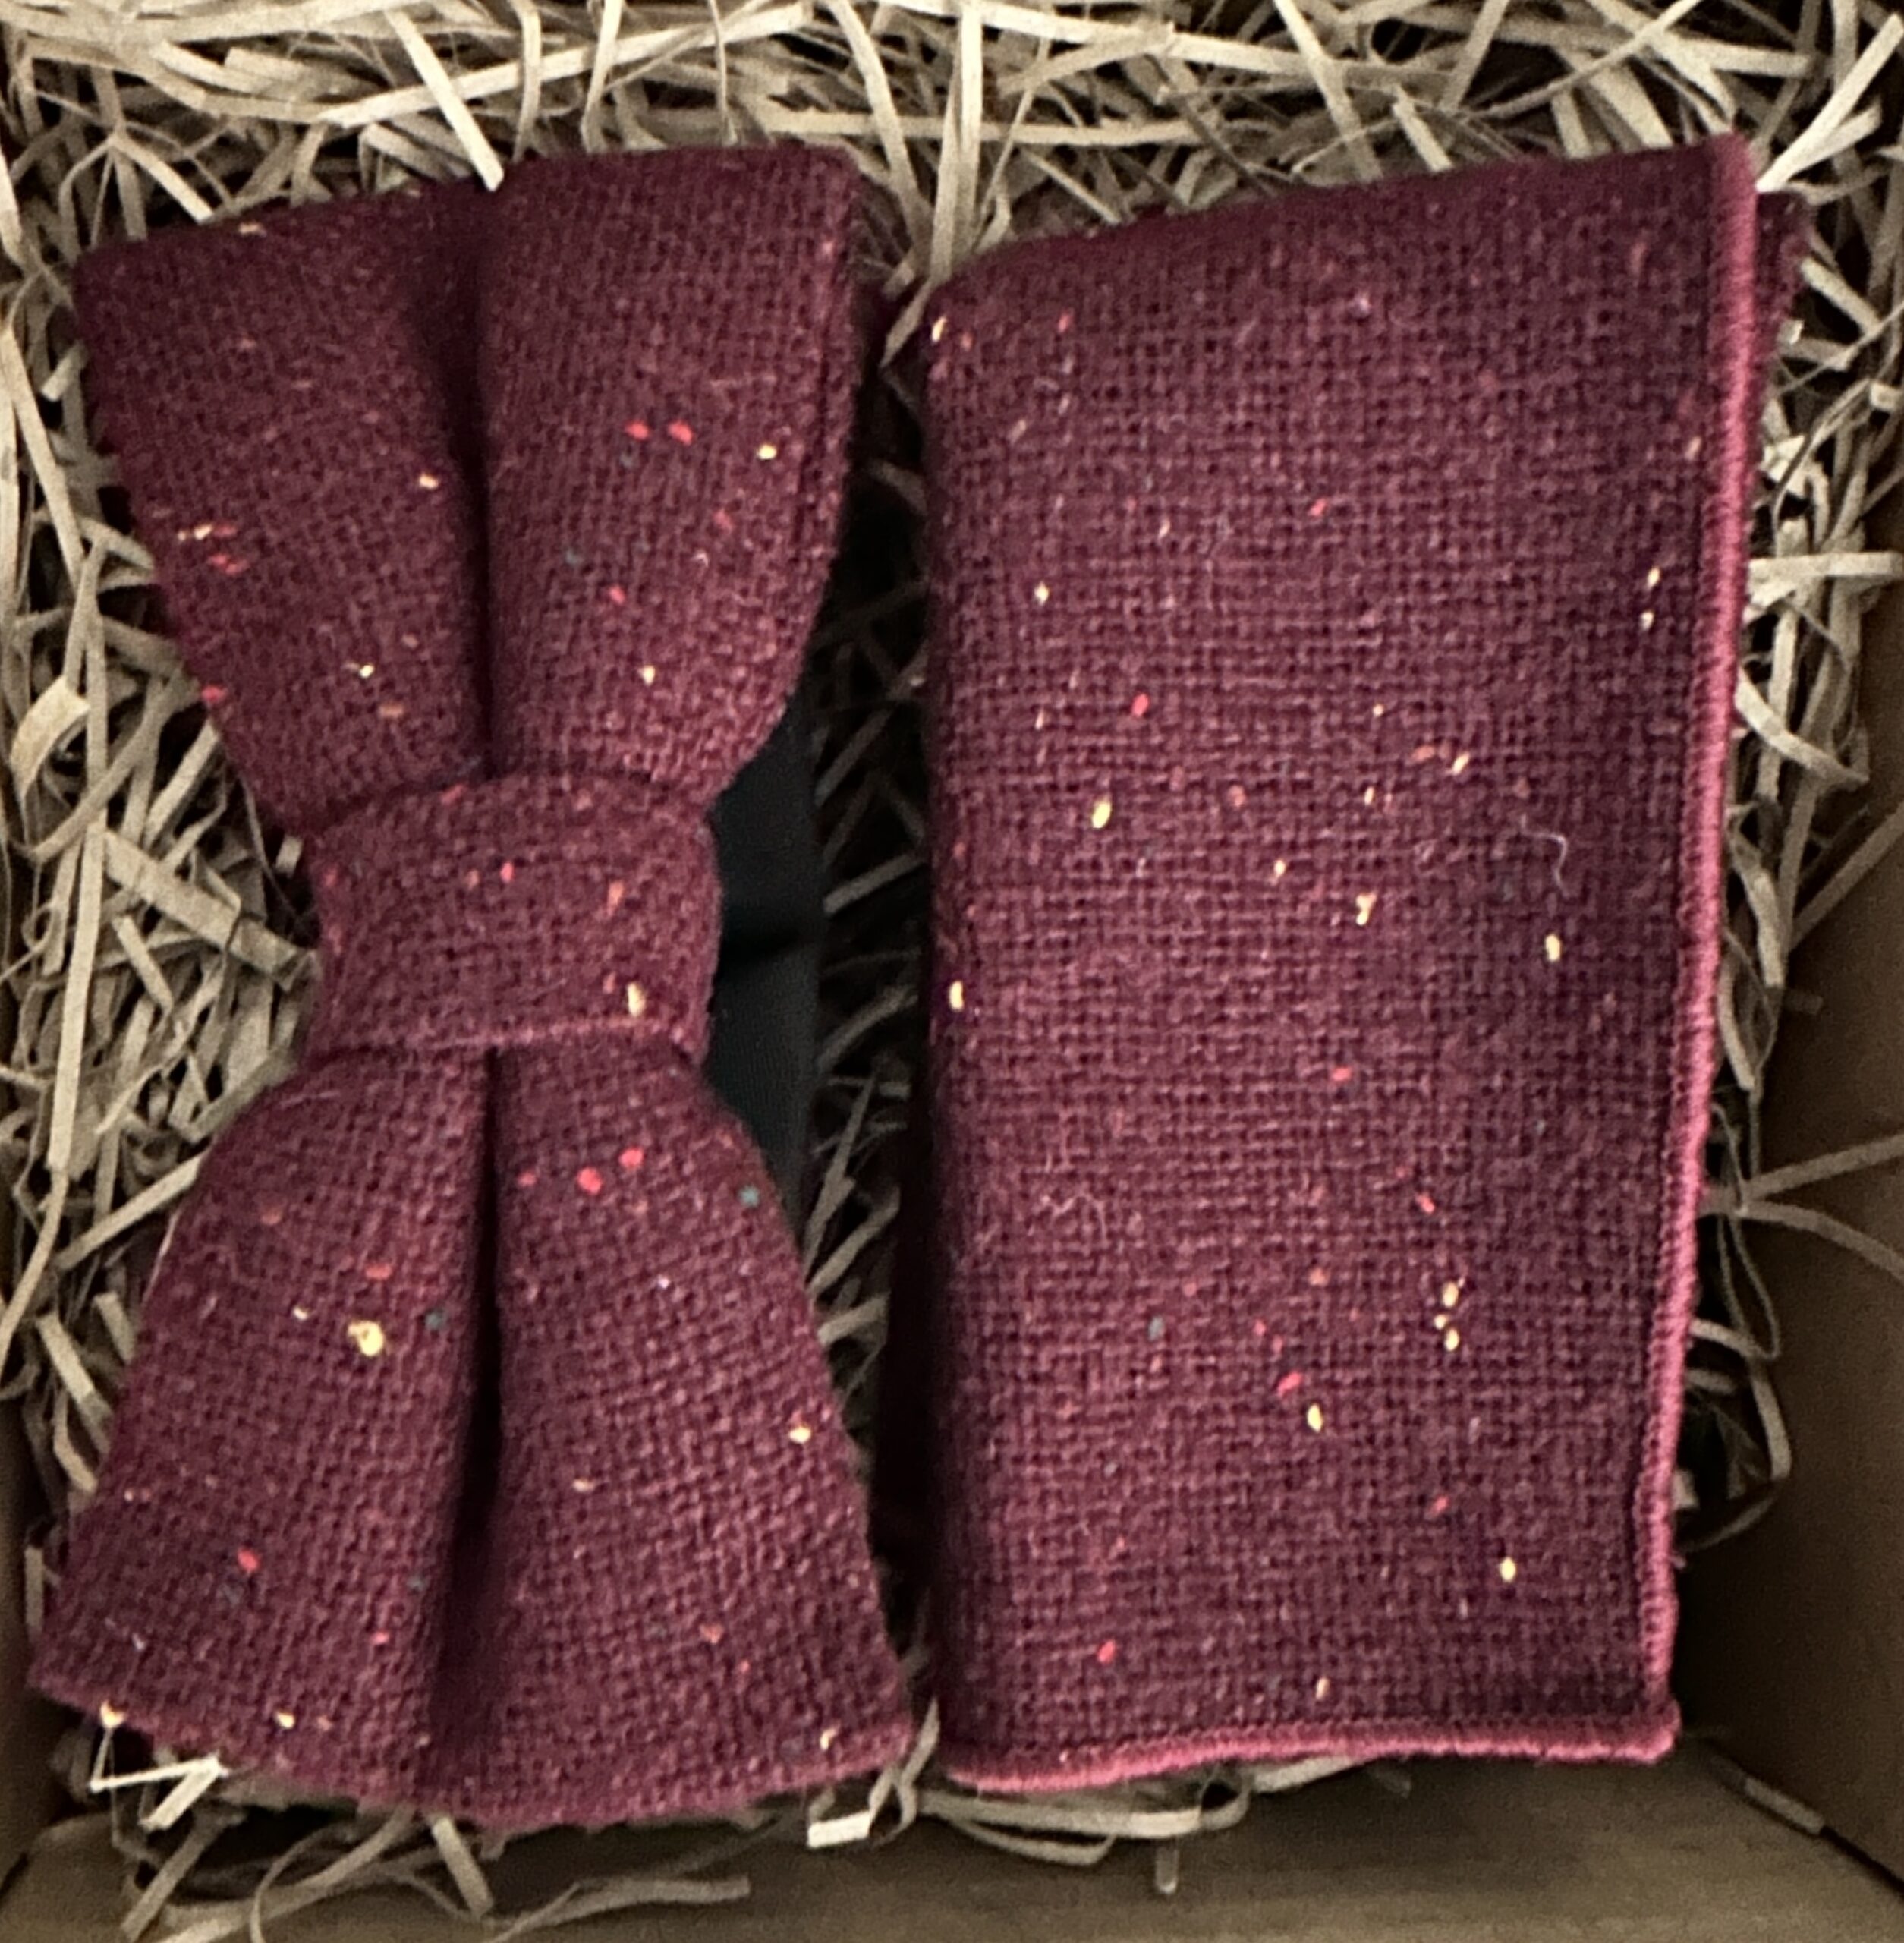 A burgundy bow tie and pocket square set in flecked wool